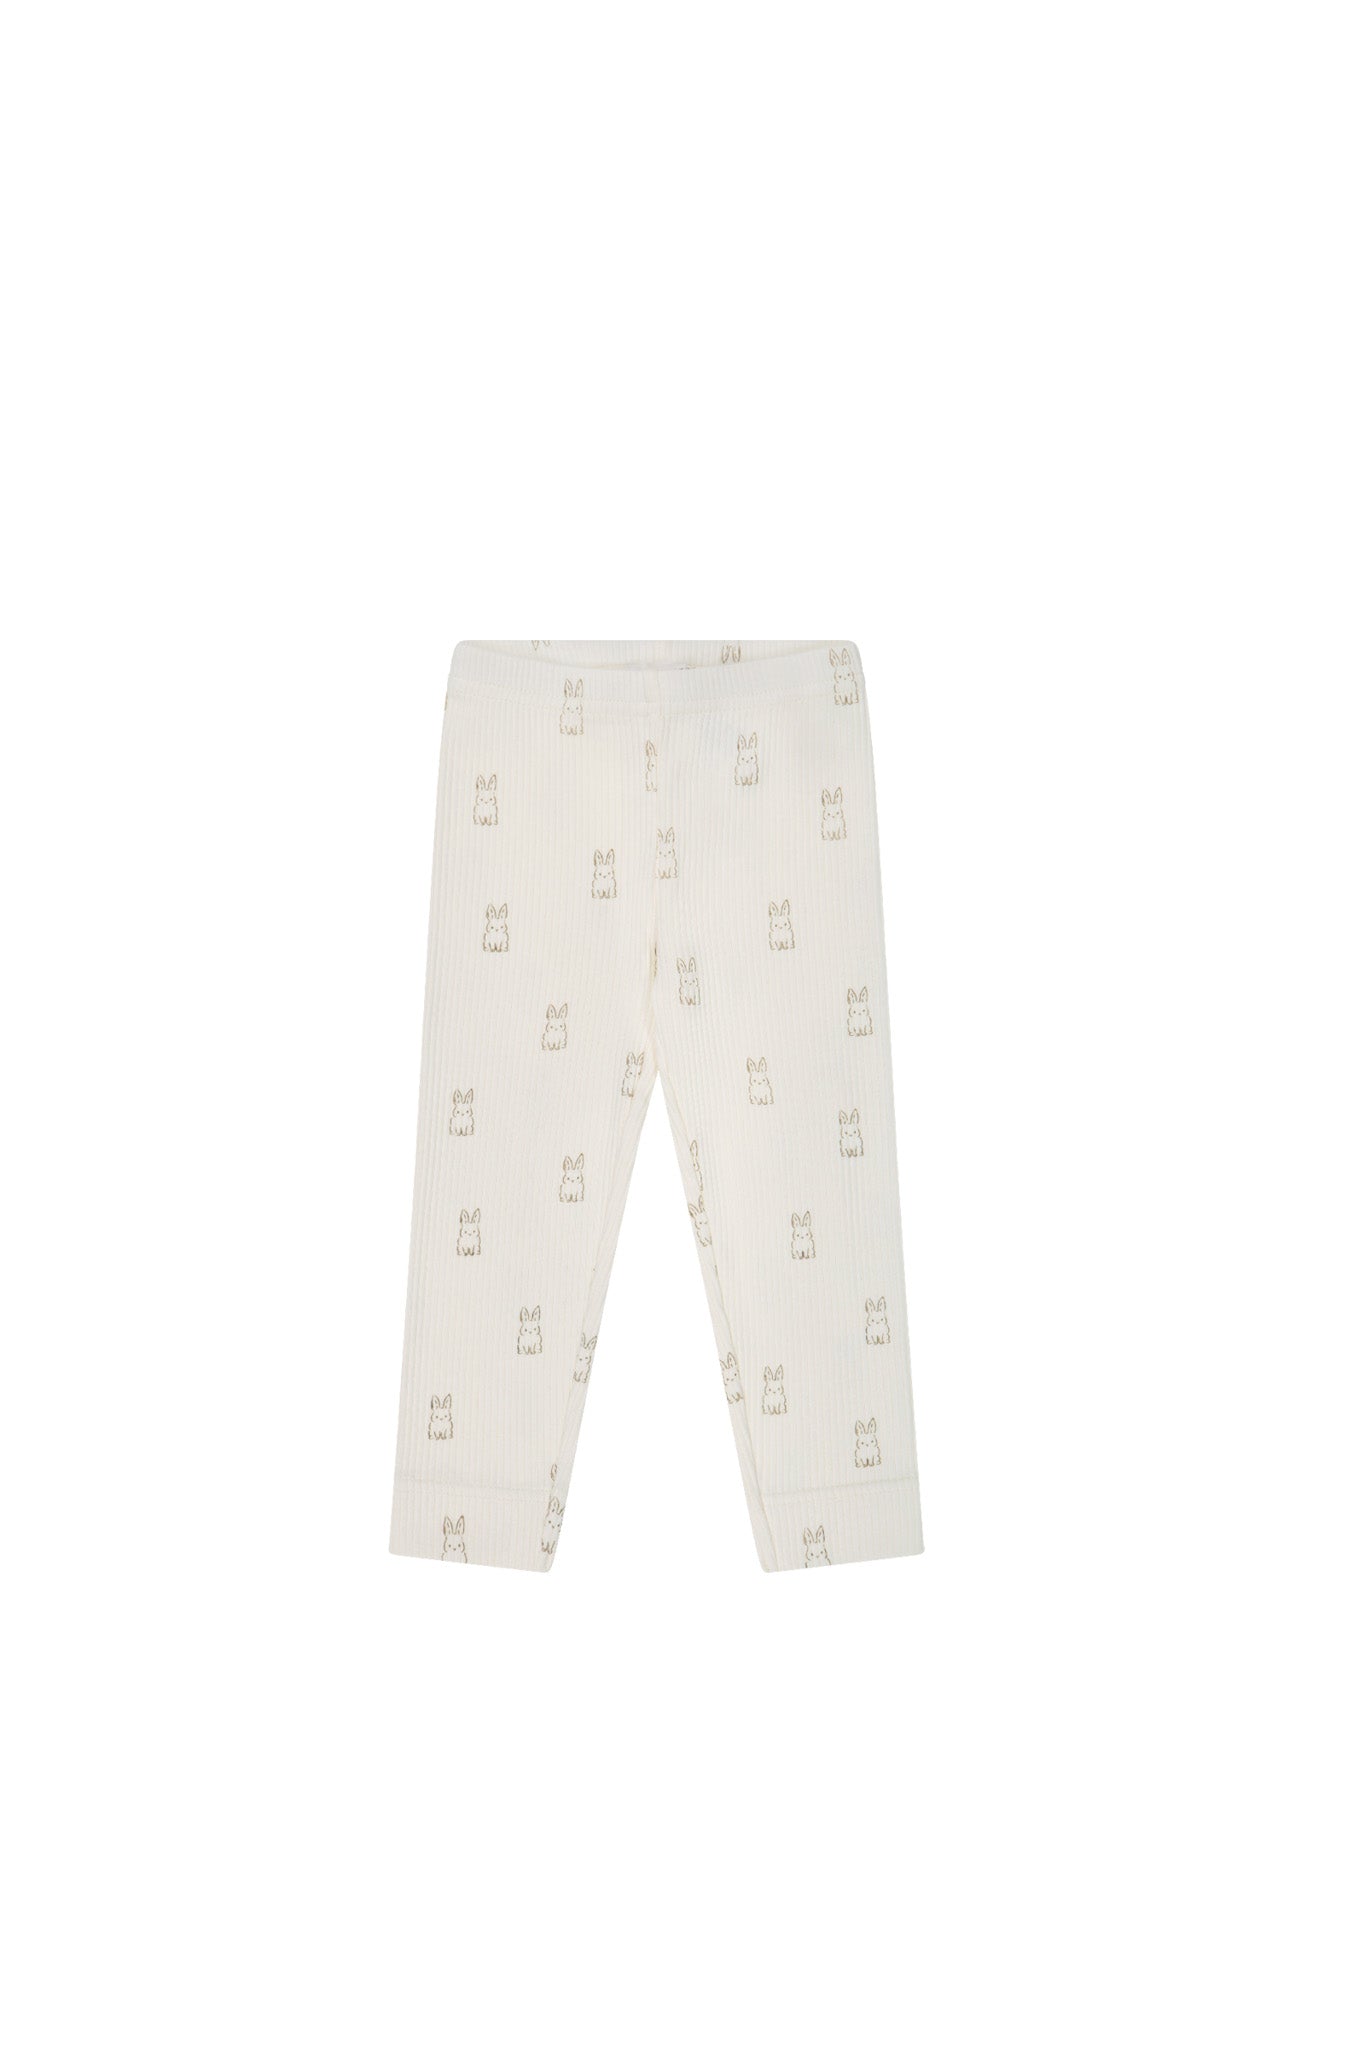 Organic Cotton Modal Everyday Legging - Bunny Buddies-Clothing & Accessories-Jamie Kay-The Bay Room